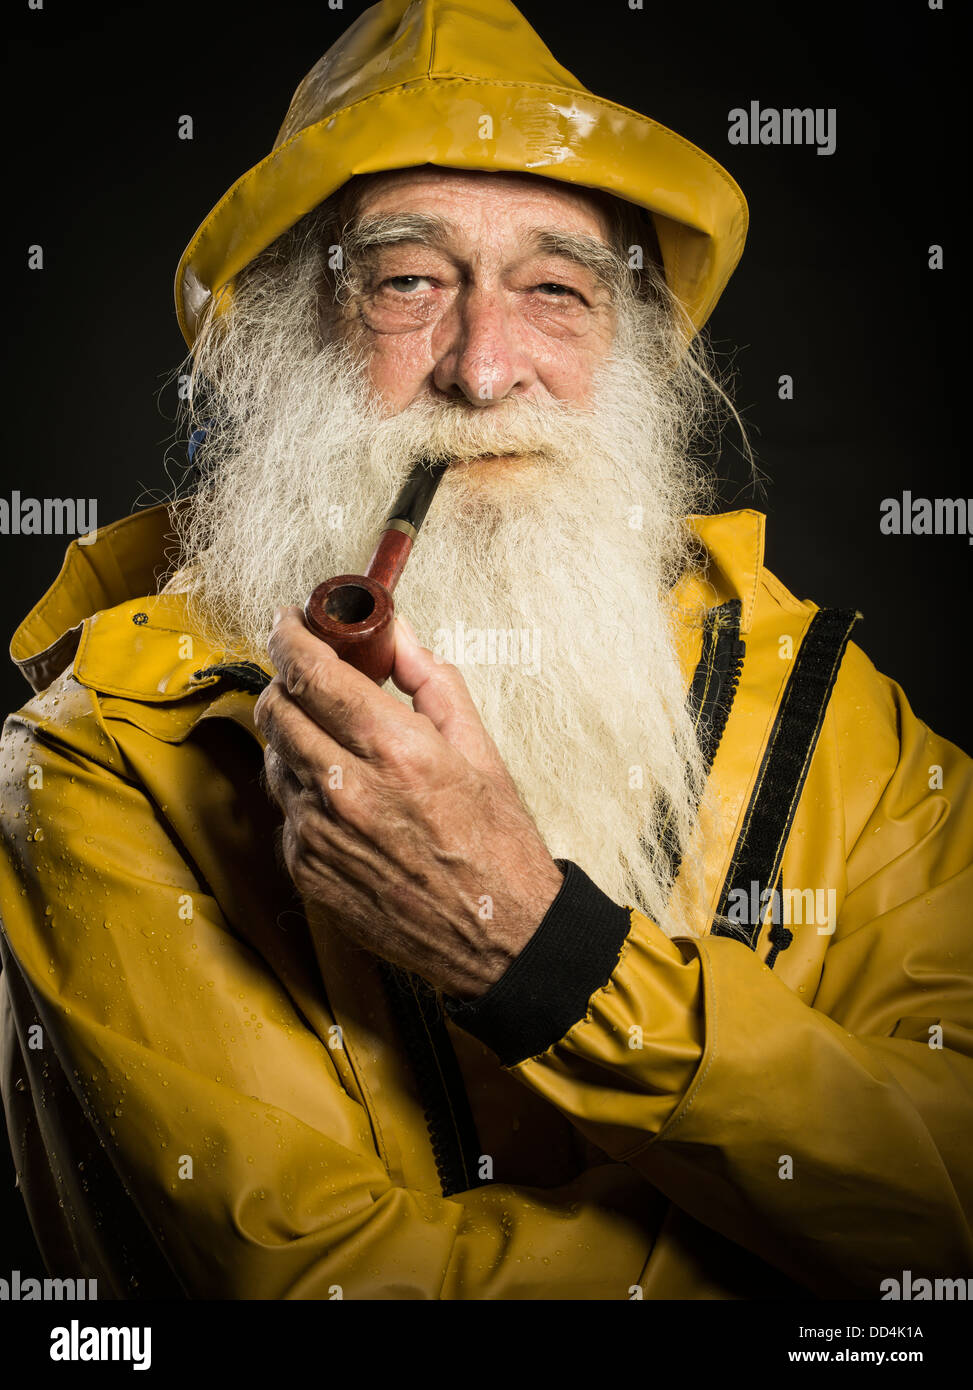 old fisherman with white beard wearing sou'wester hat and guy cotten  oilskin jacket Stock Photo - Alamy